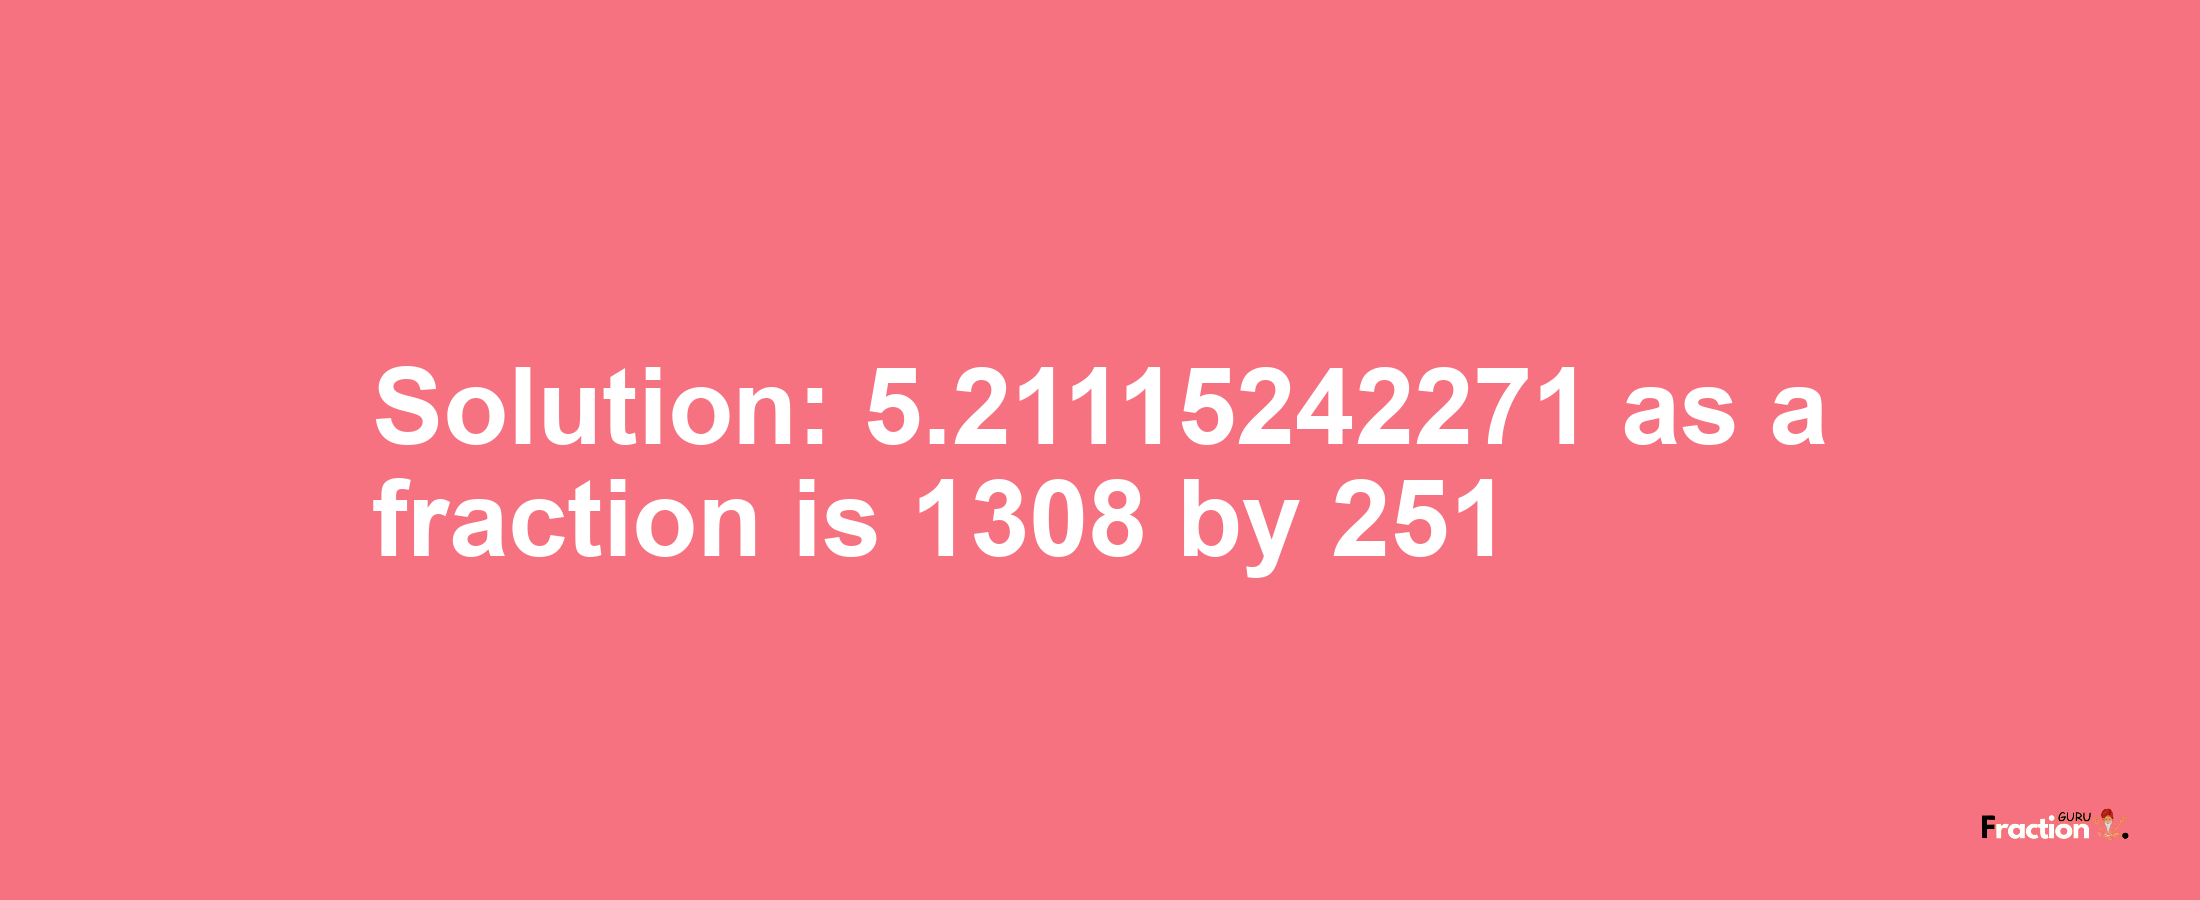 Solution:5.21115242271 as a fraction is 1308/251